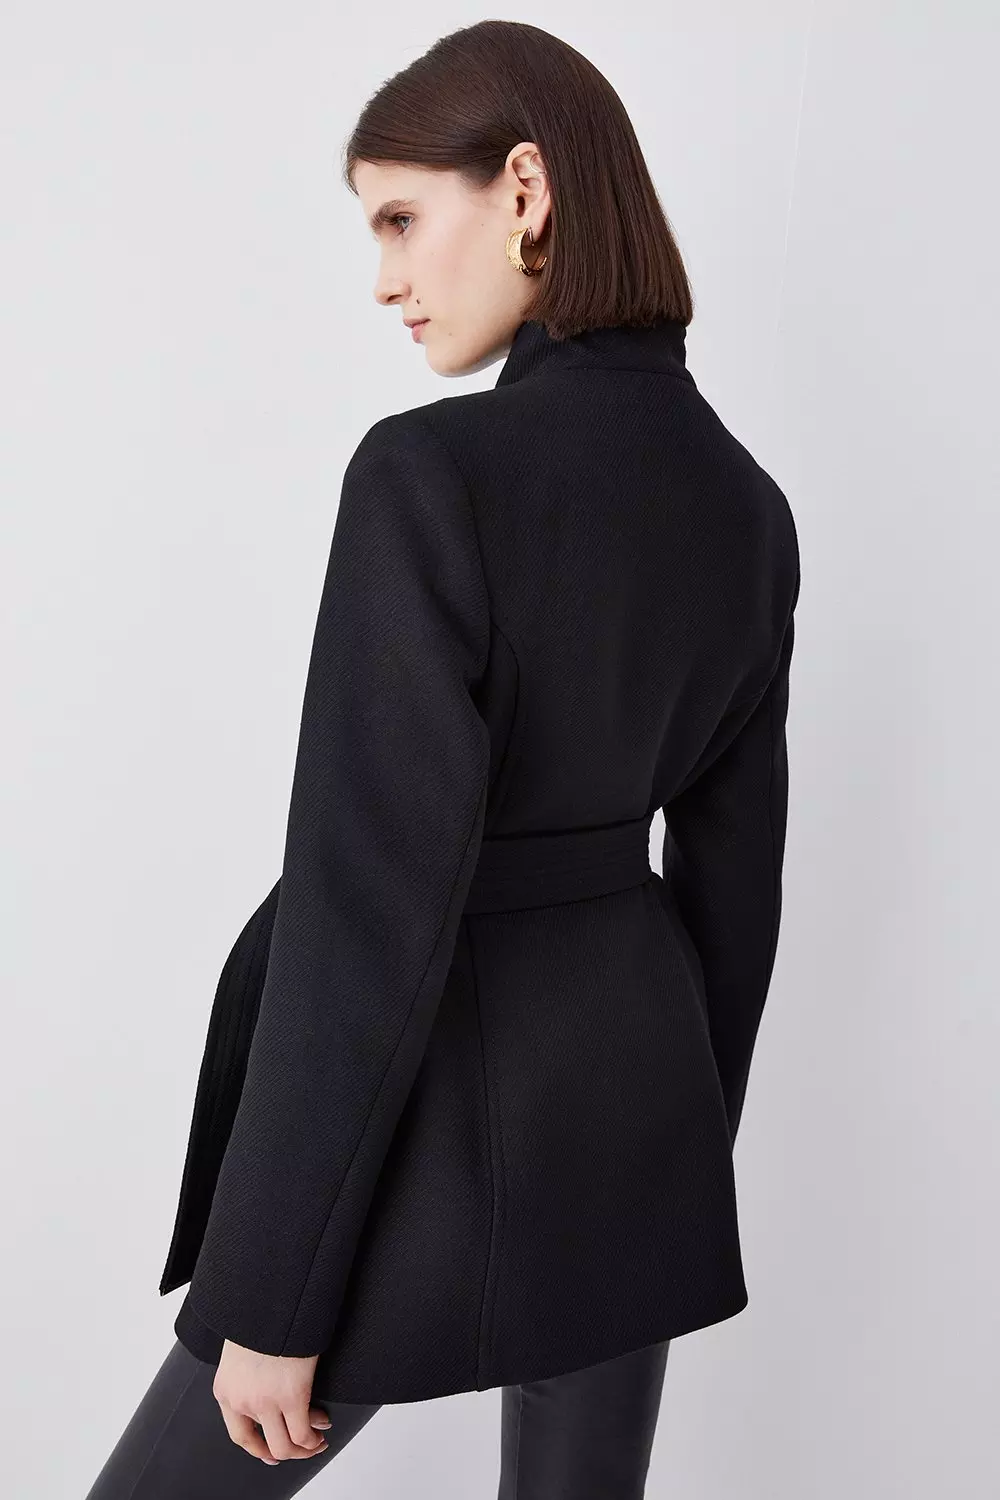 Belted Short Wrap Pea Coat - Ready-to-Wear 1A91SM